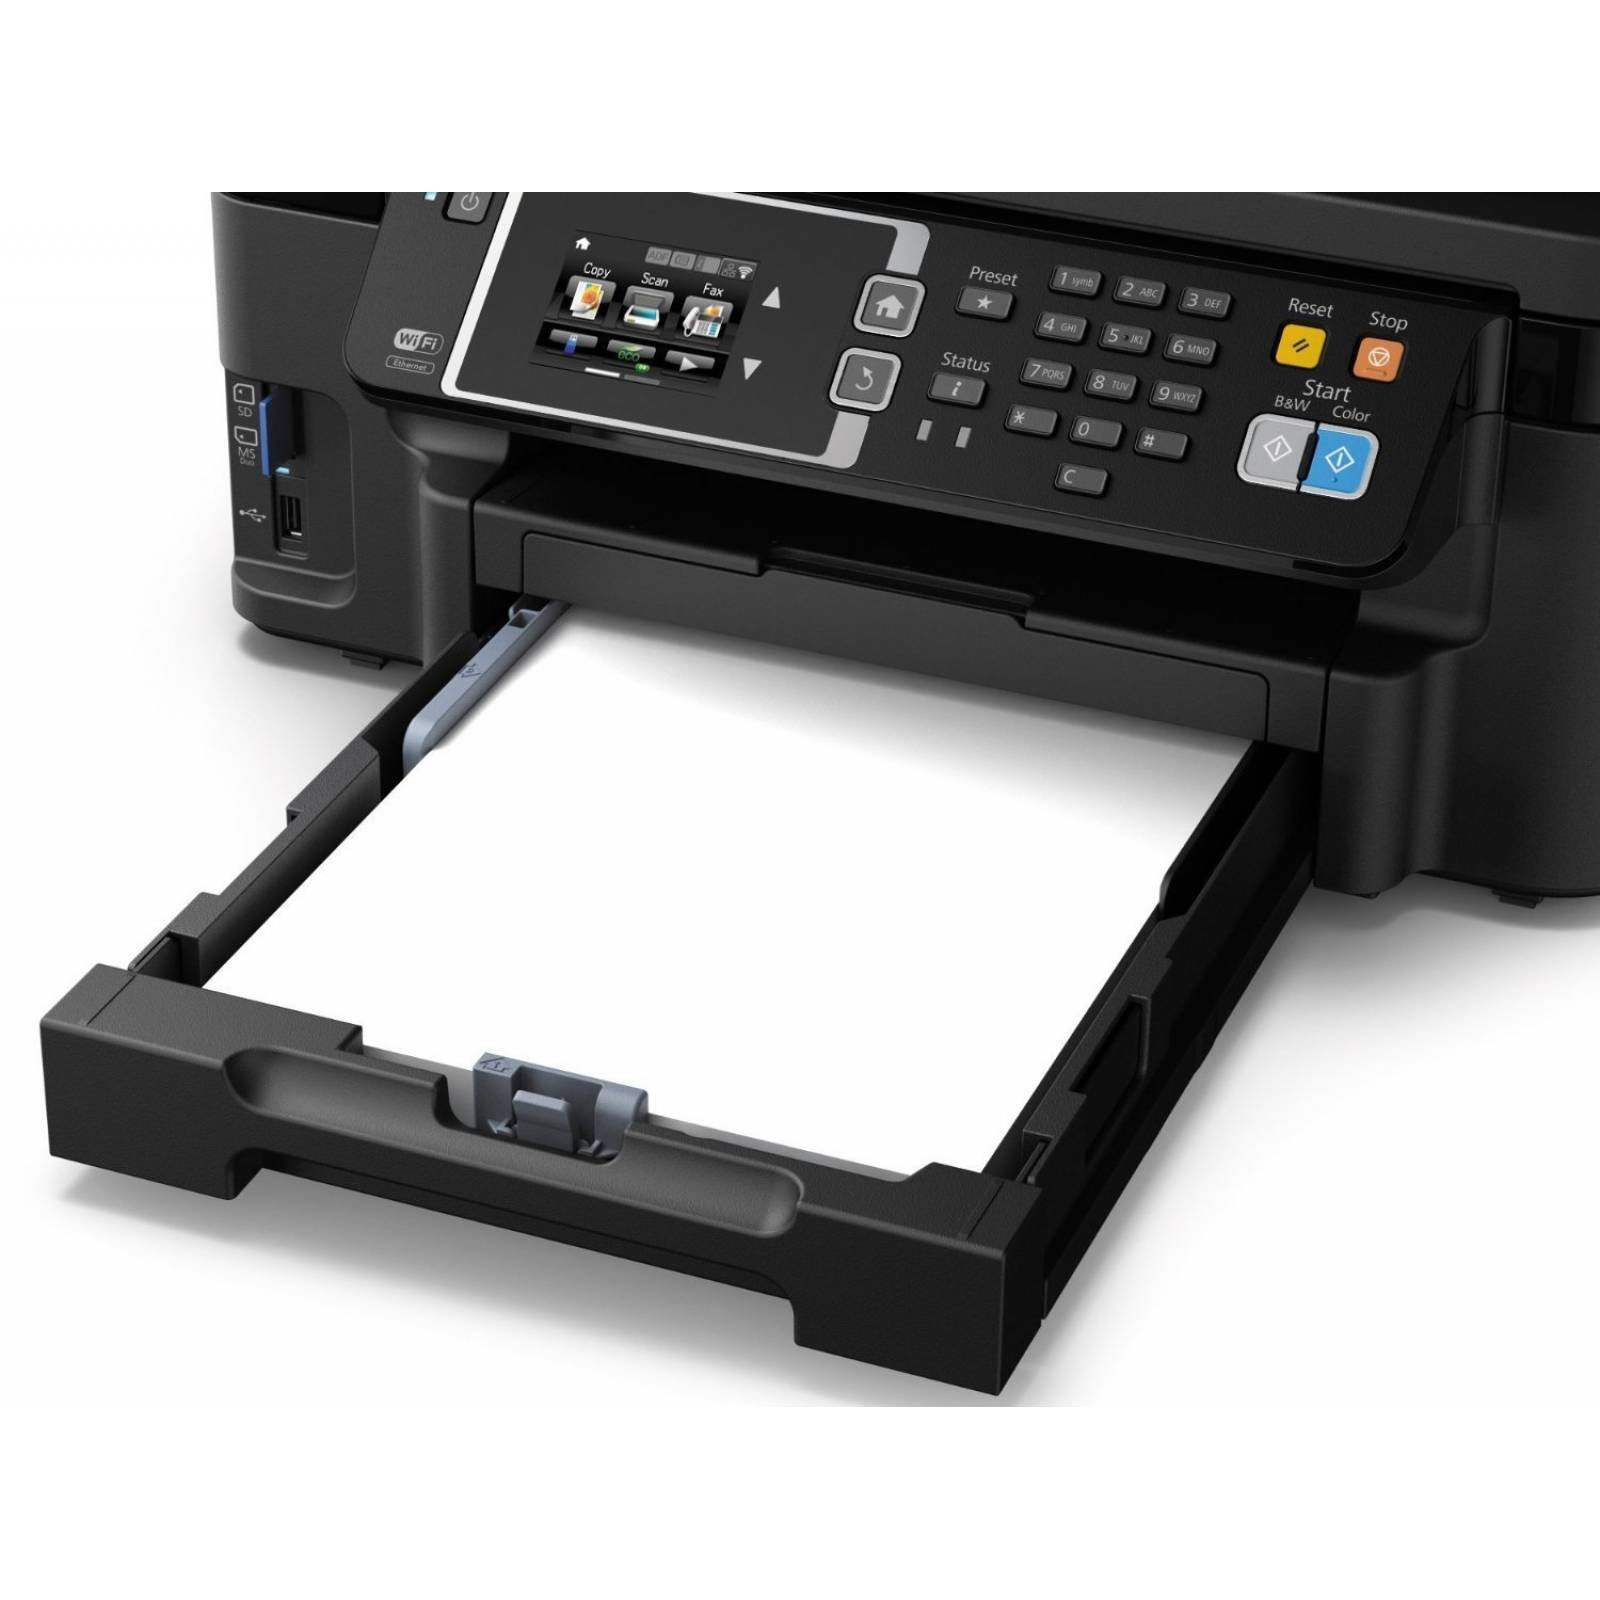 Epson Workforce Wf 3620 Wifi Directo All In One Inyección Ti 1199